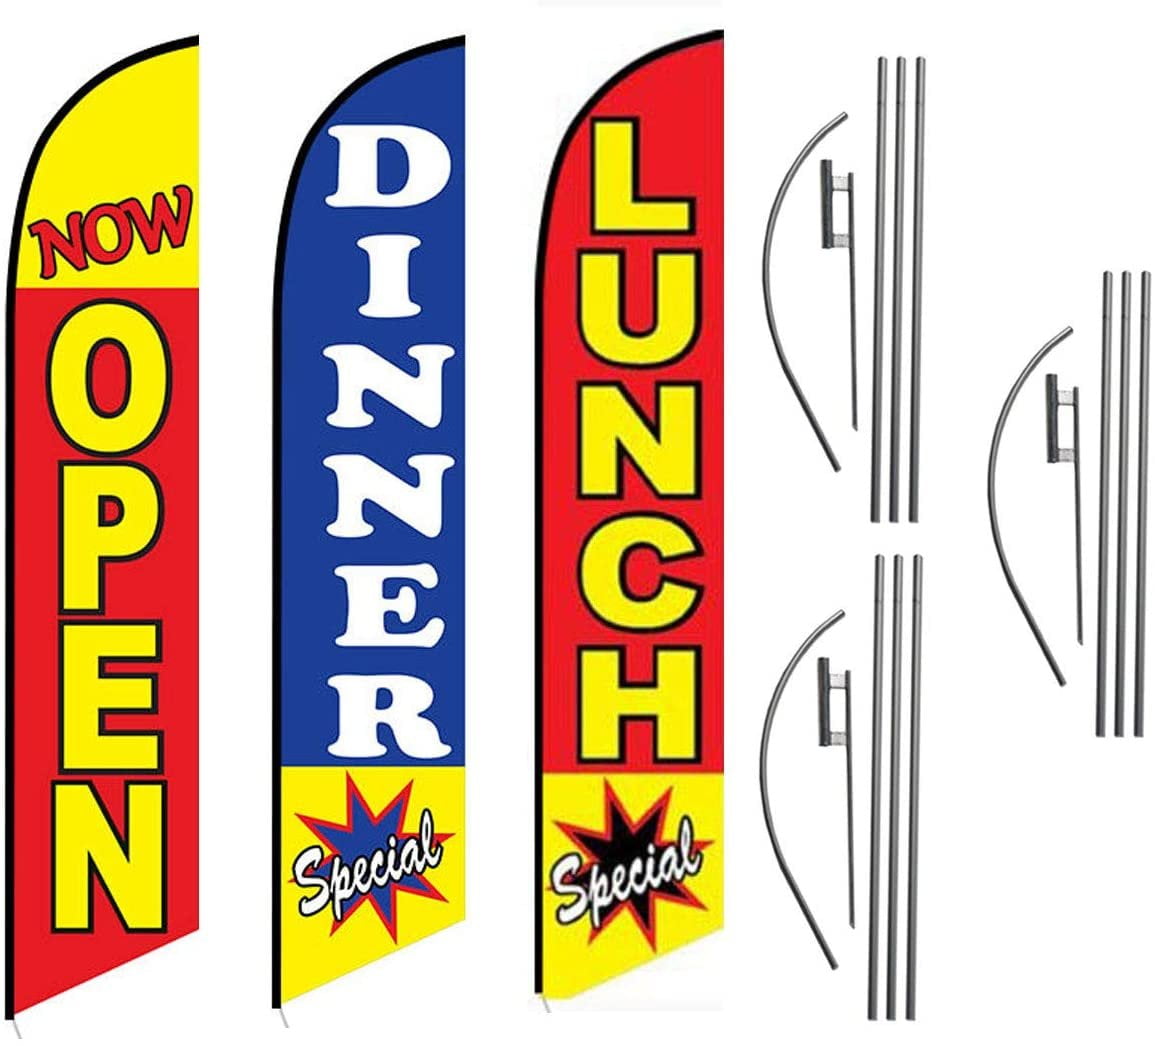 NOW SERVING LUNCH Advertising Vinyl Banner Flag Sign Many Sizes Available USA 